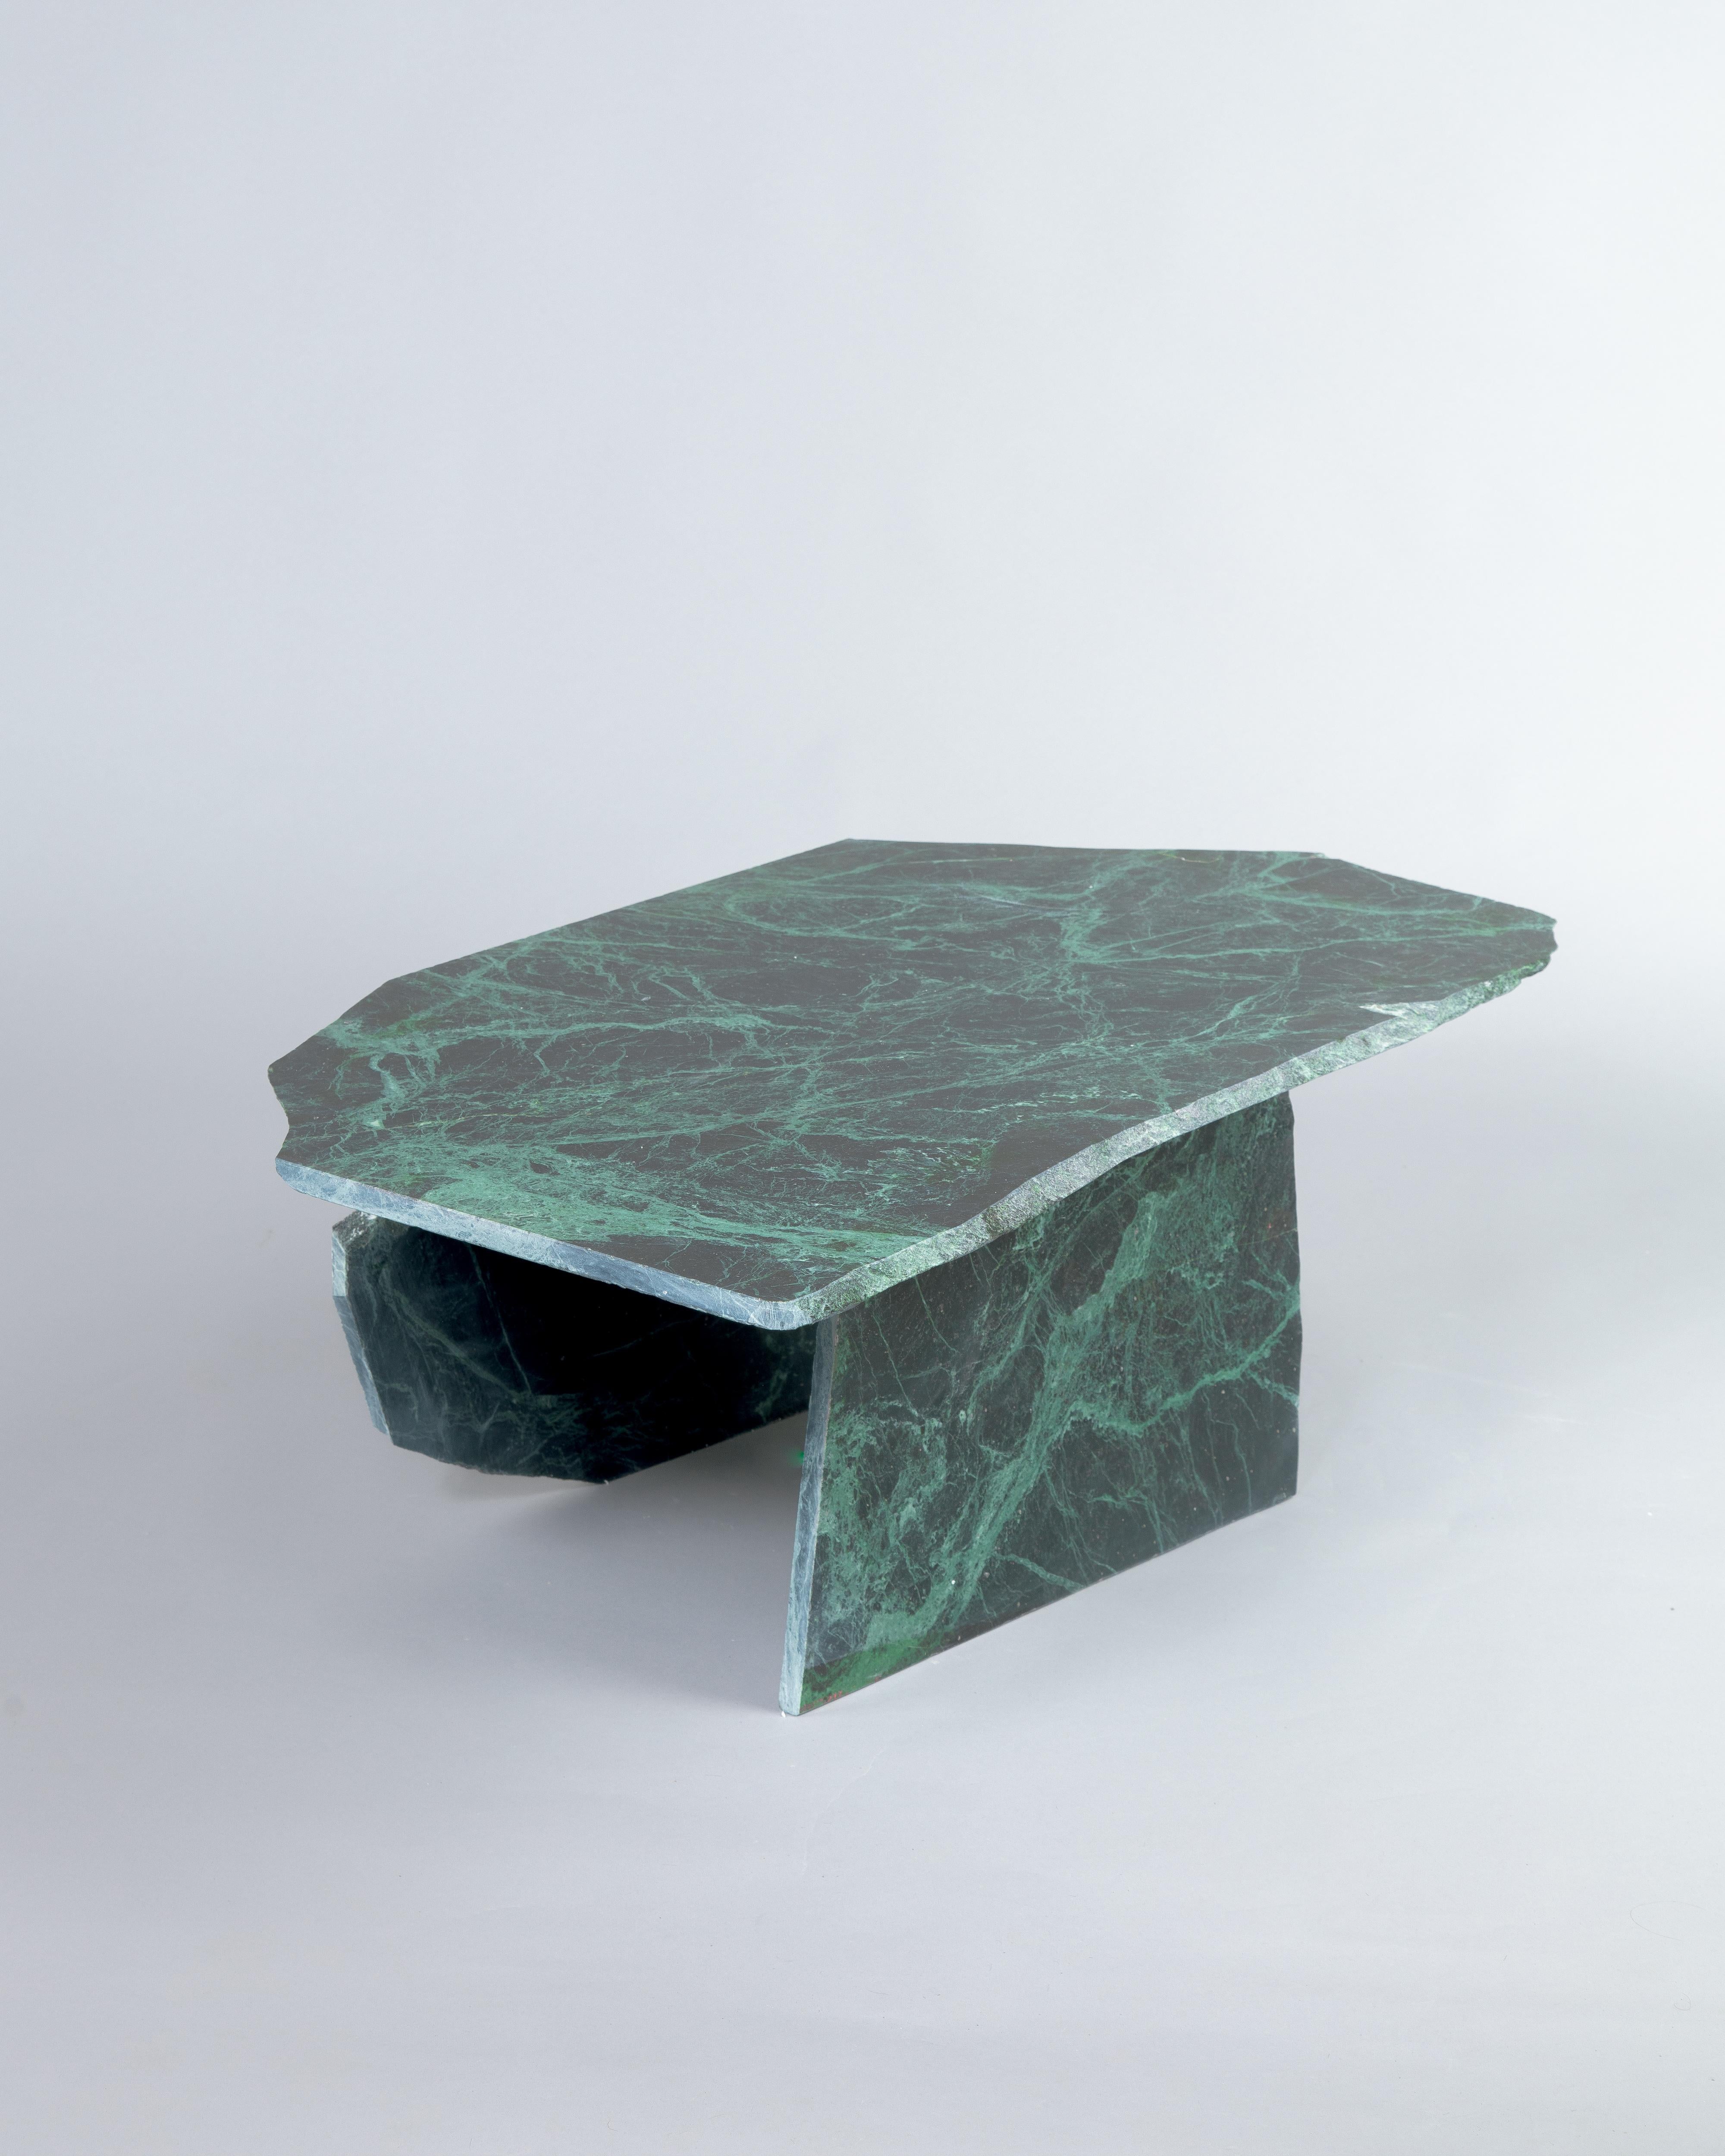 Shattered table mini by Daniel Nikolovski
One of a kind piece
Dimensions: W 68 x D 40 x H 27 cm
Also available in W 97 x D 53 x H 32 cm.
Materials: Serpentino marble matt

Leftover shattered marble pieces turned into functional coffee tables. In